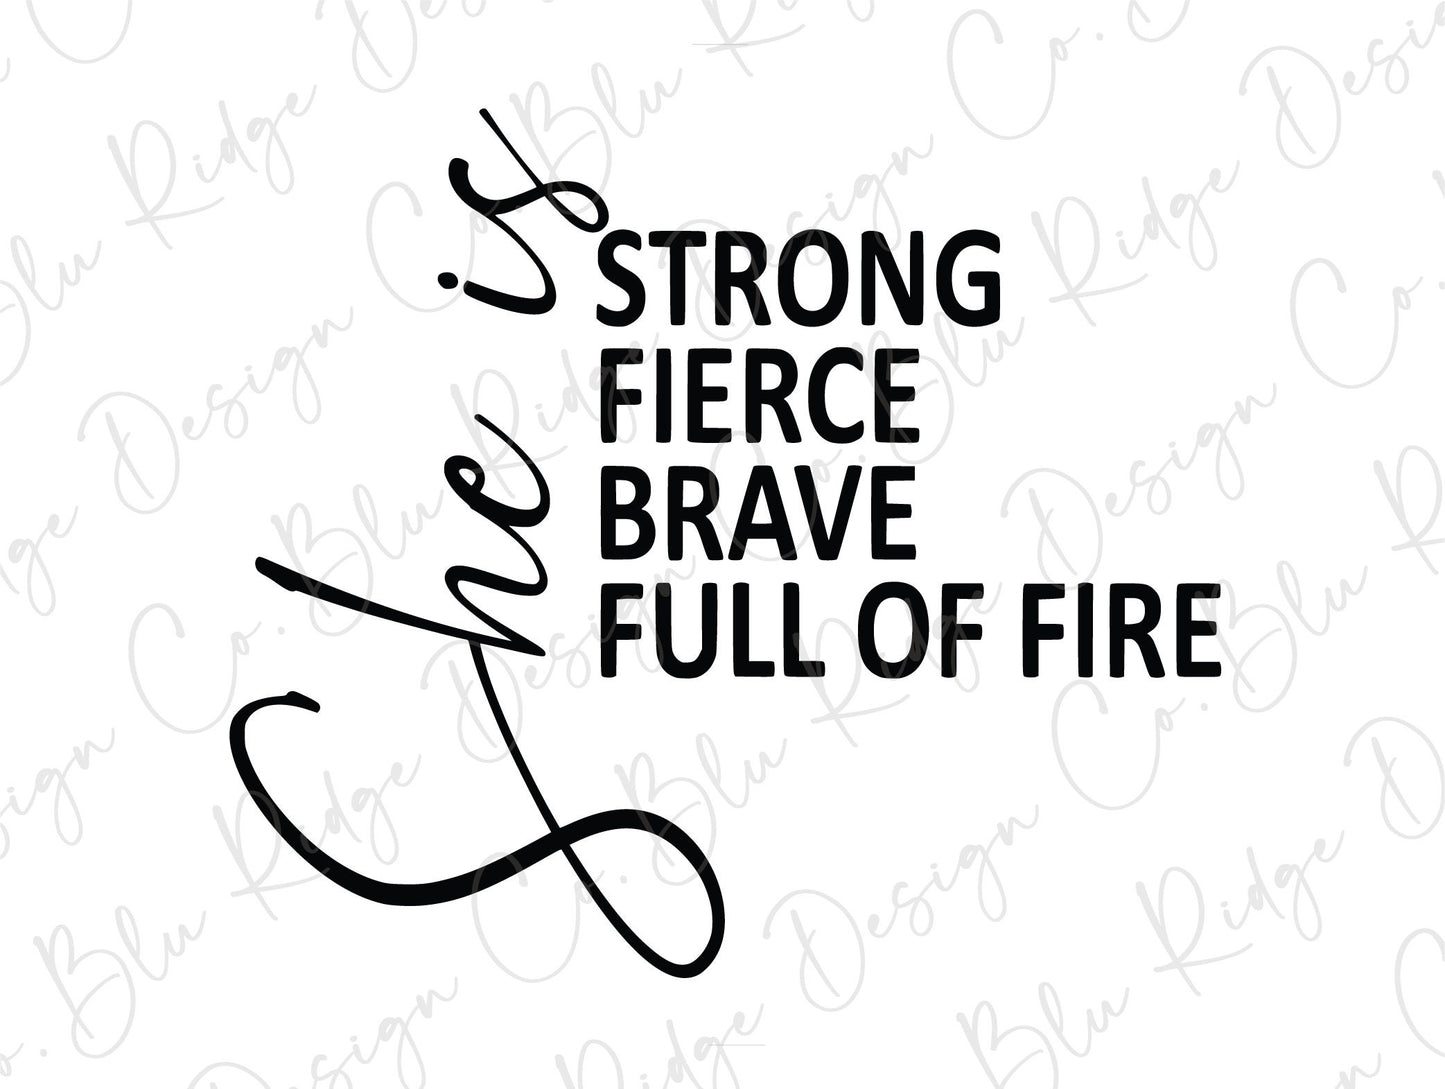 She is Strong Fierce Brave Full of Fire Quote Saying Direct to Film (DTF) Transfer